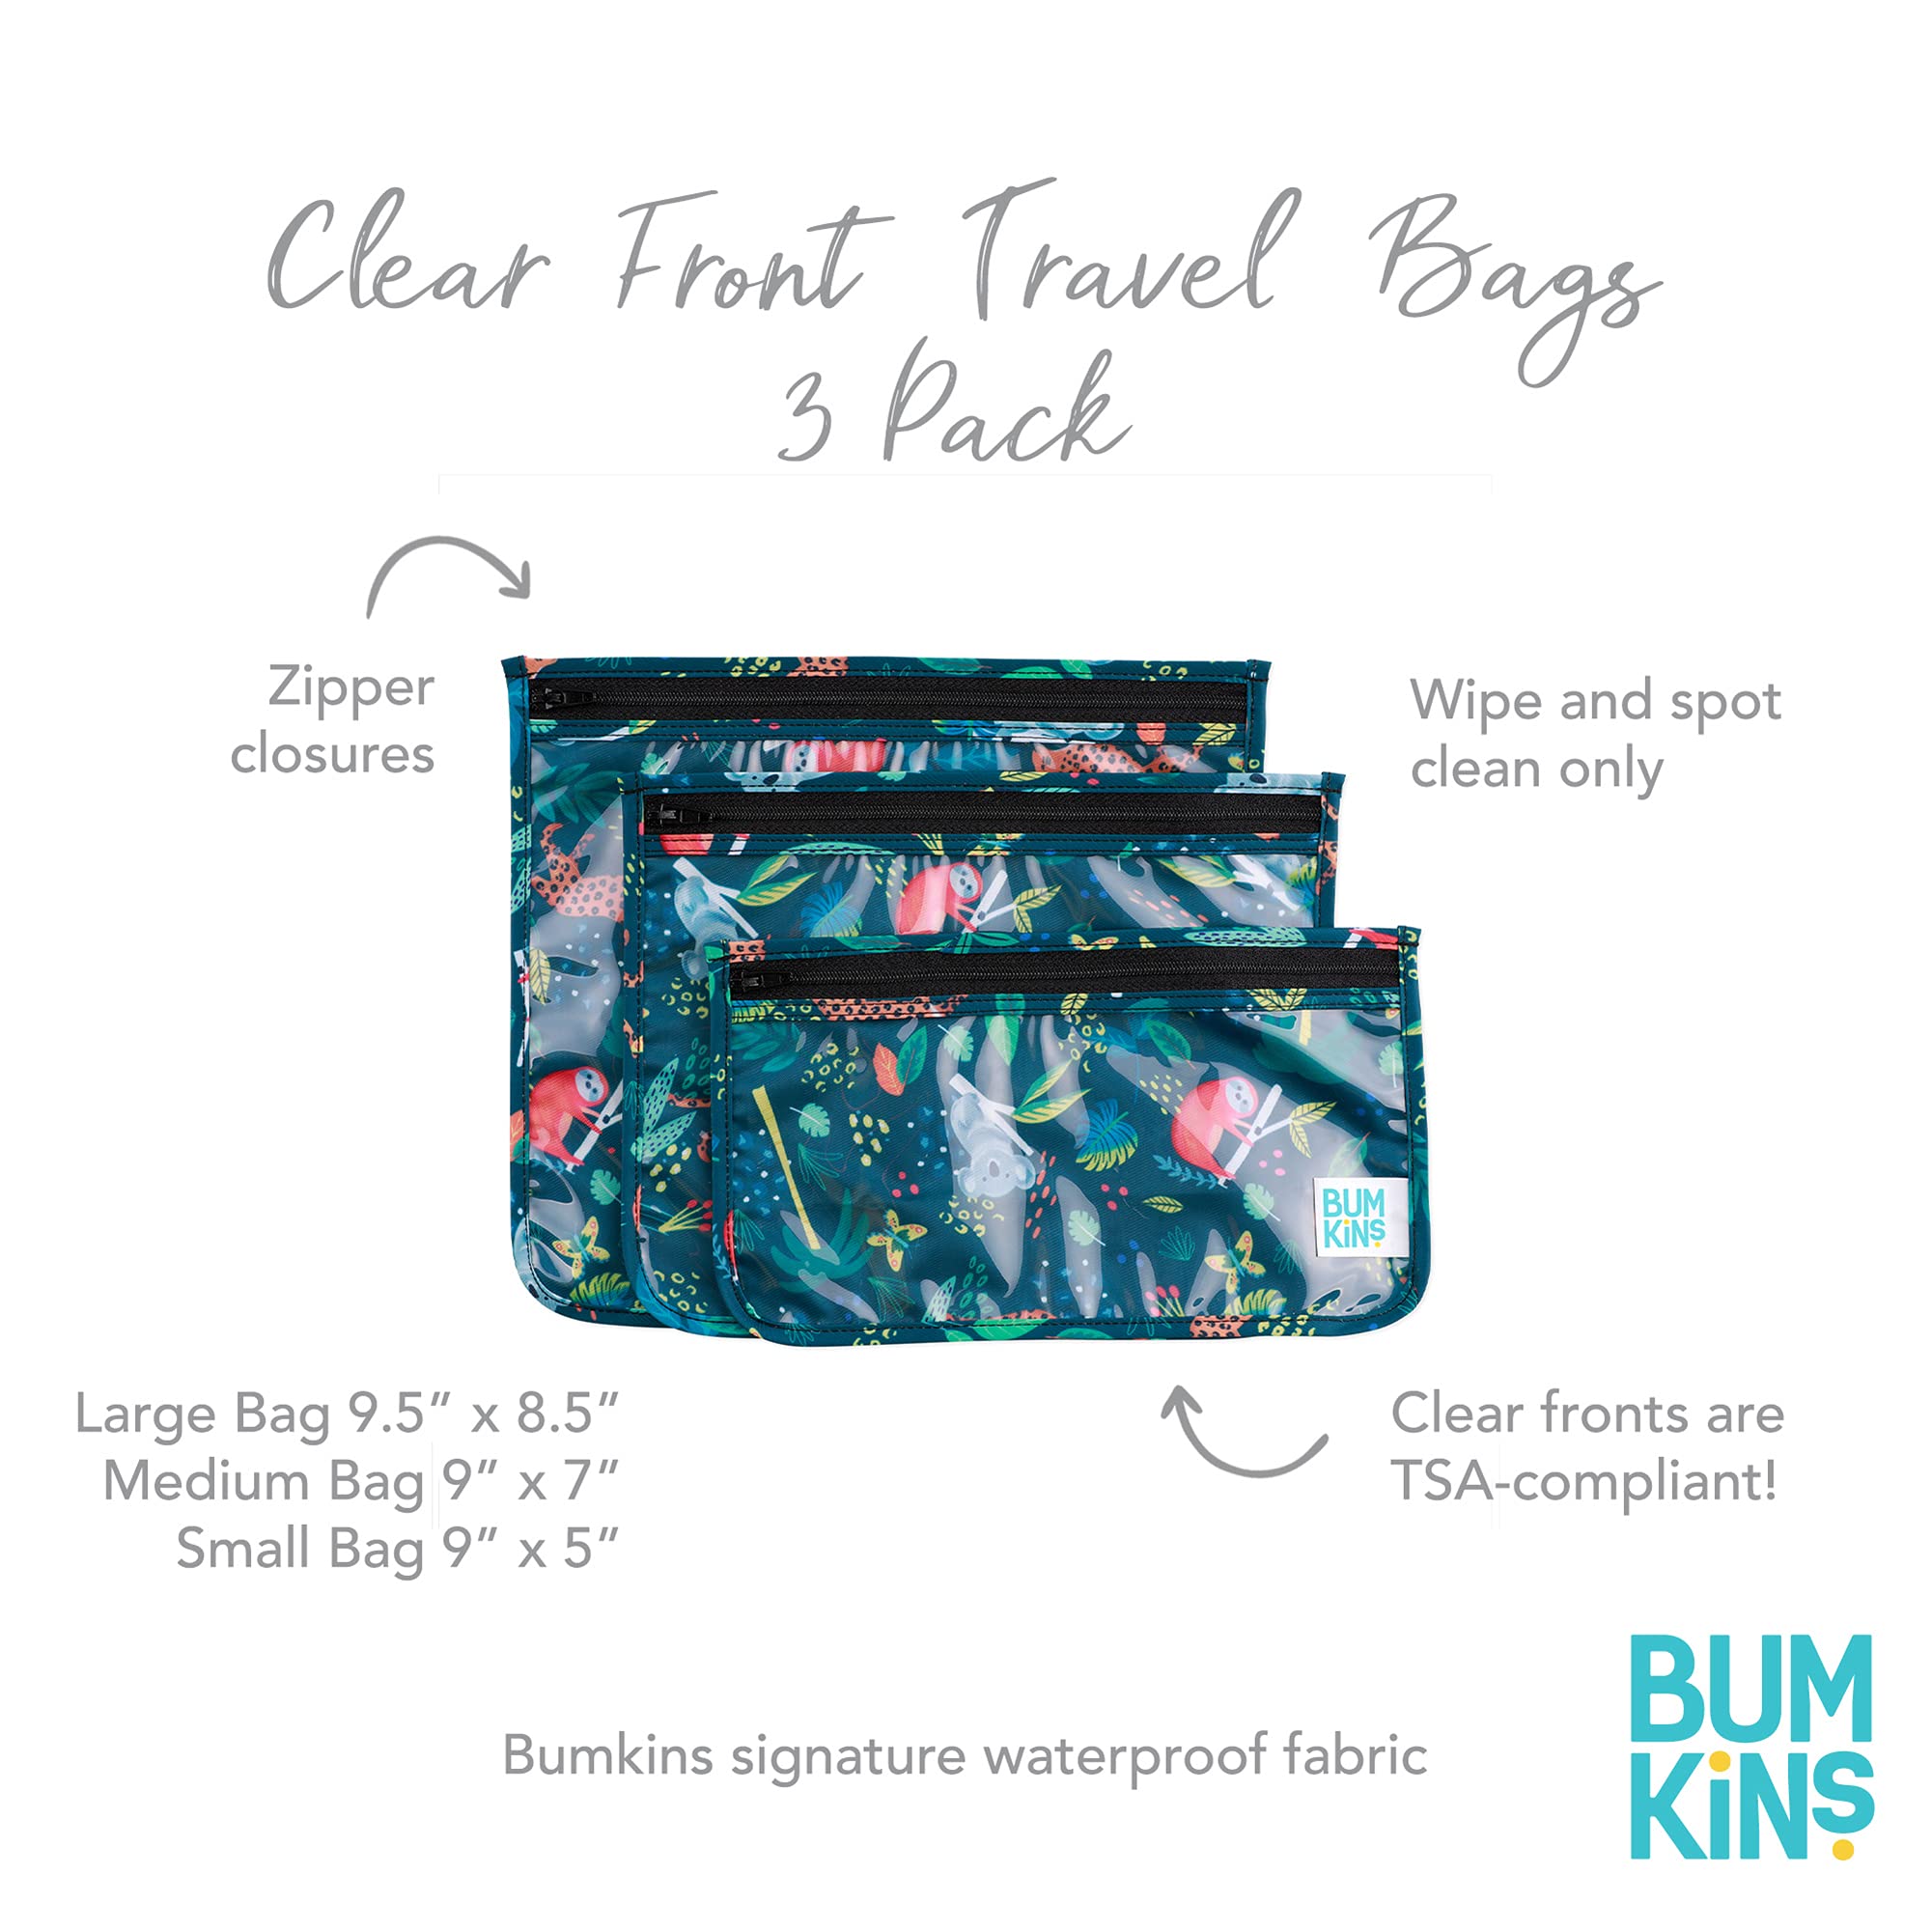 Bumkins Travel Bag, Toiletry, Baby, TSA Approved Pouch, Zip Bag, Quart Size Compliant, Clear-Sided, Diaper Bag Organization